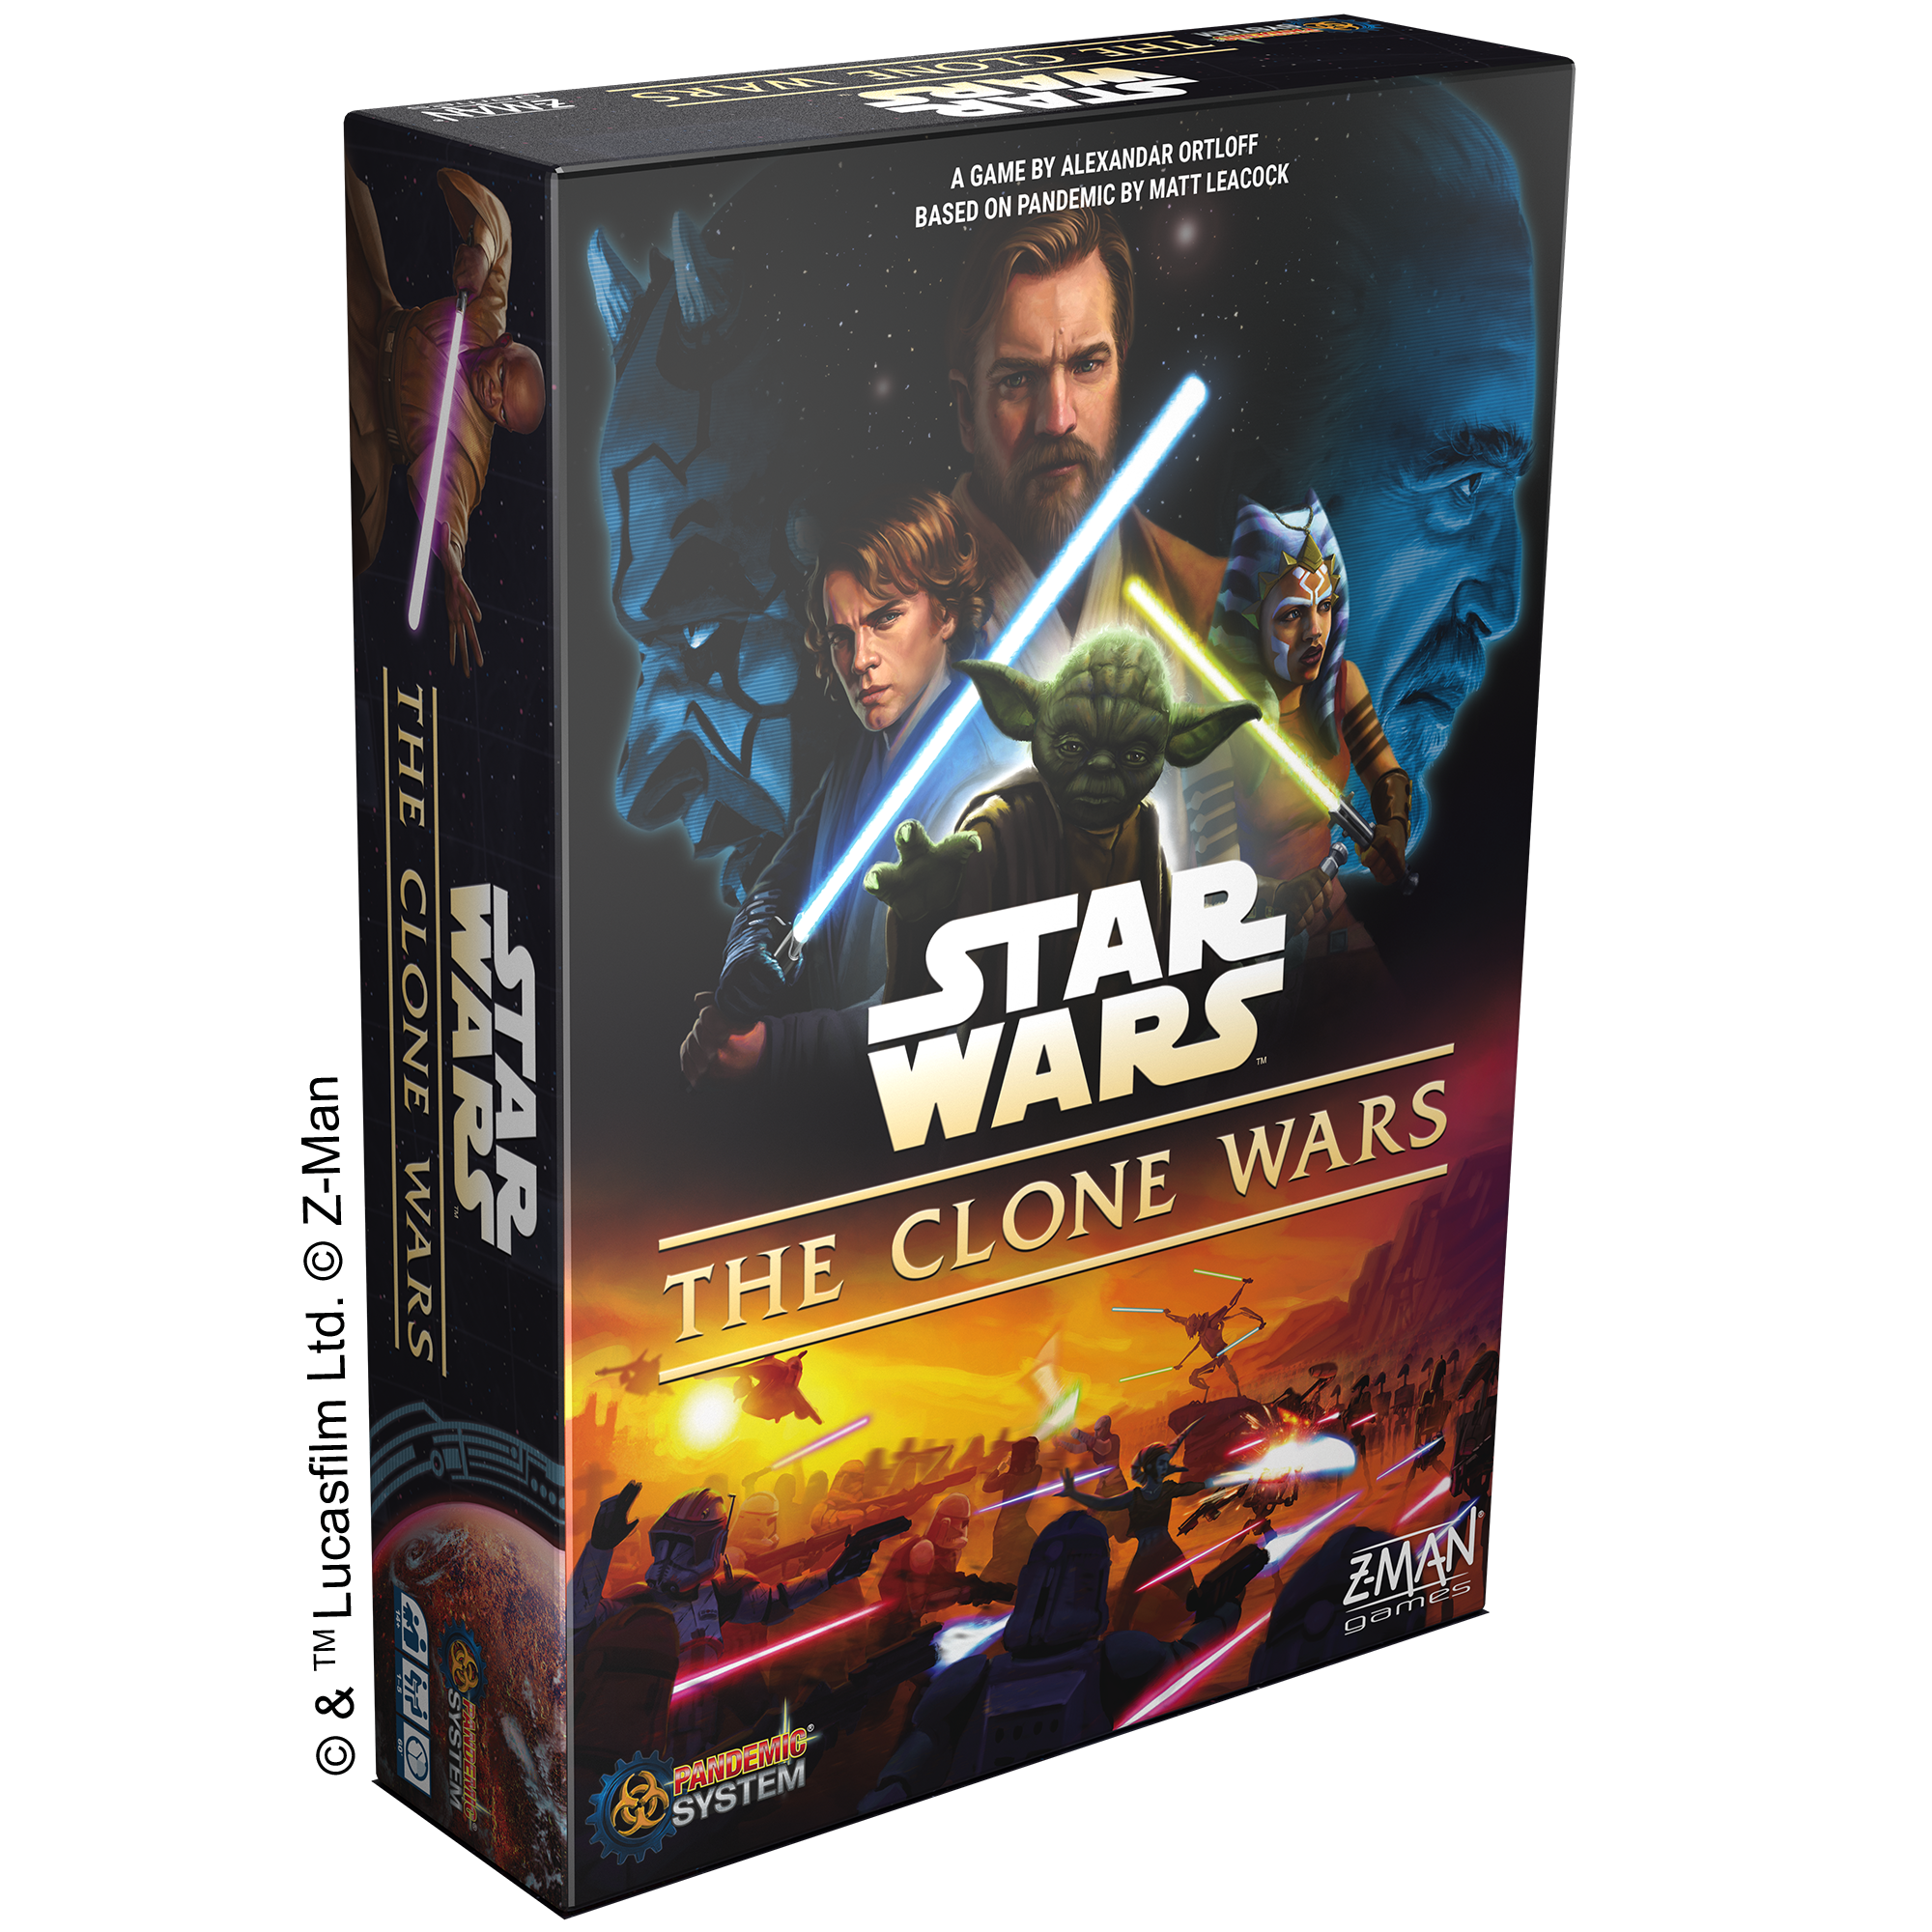 Star Wars: The Clone Wars – A Pandemic System Game box